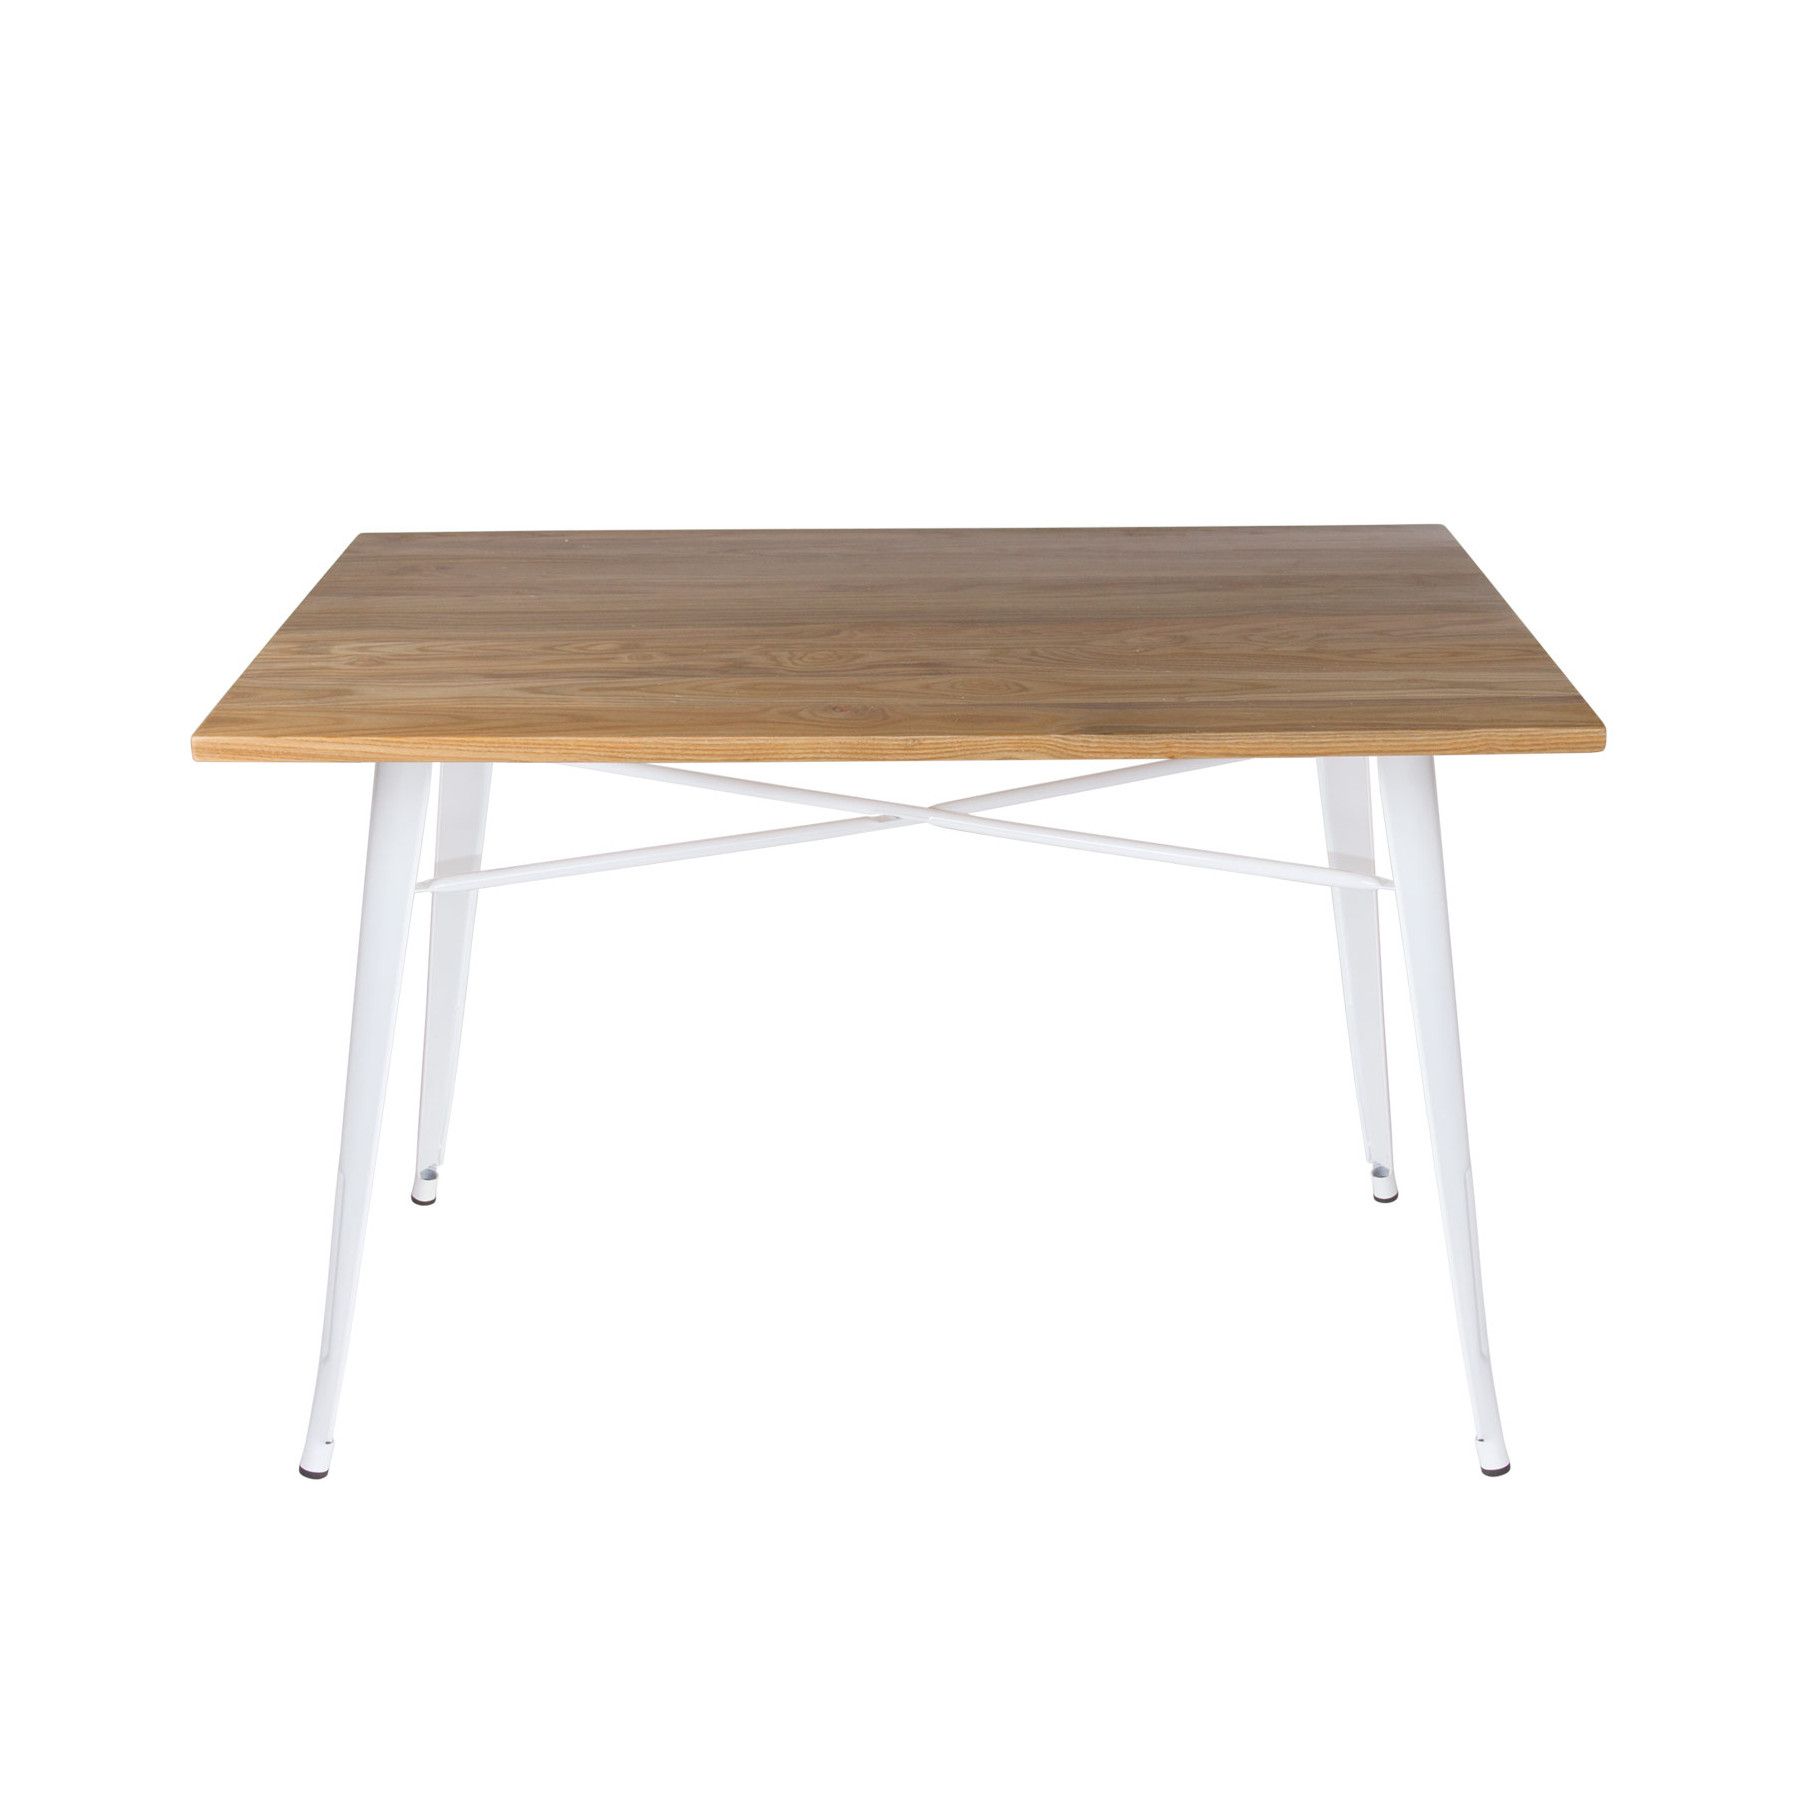 TABLE LANK WOOD BLANCHE 120 x 80 cm